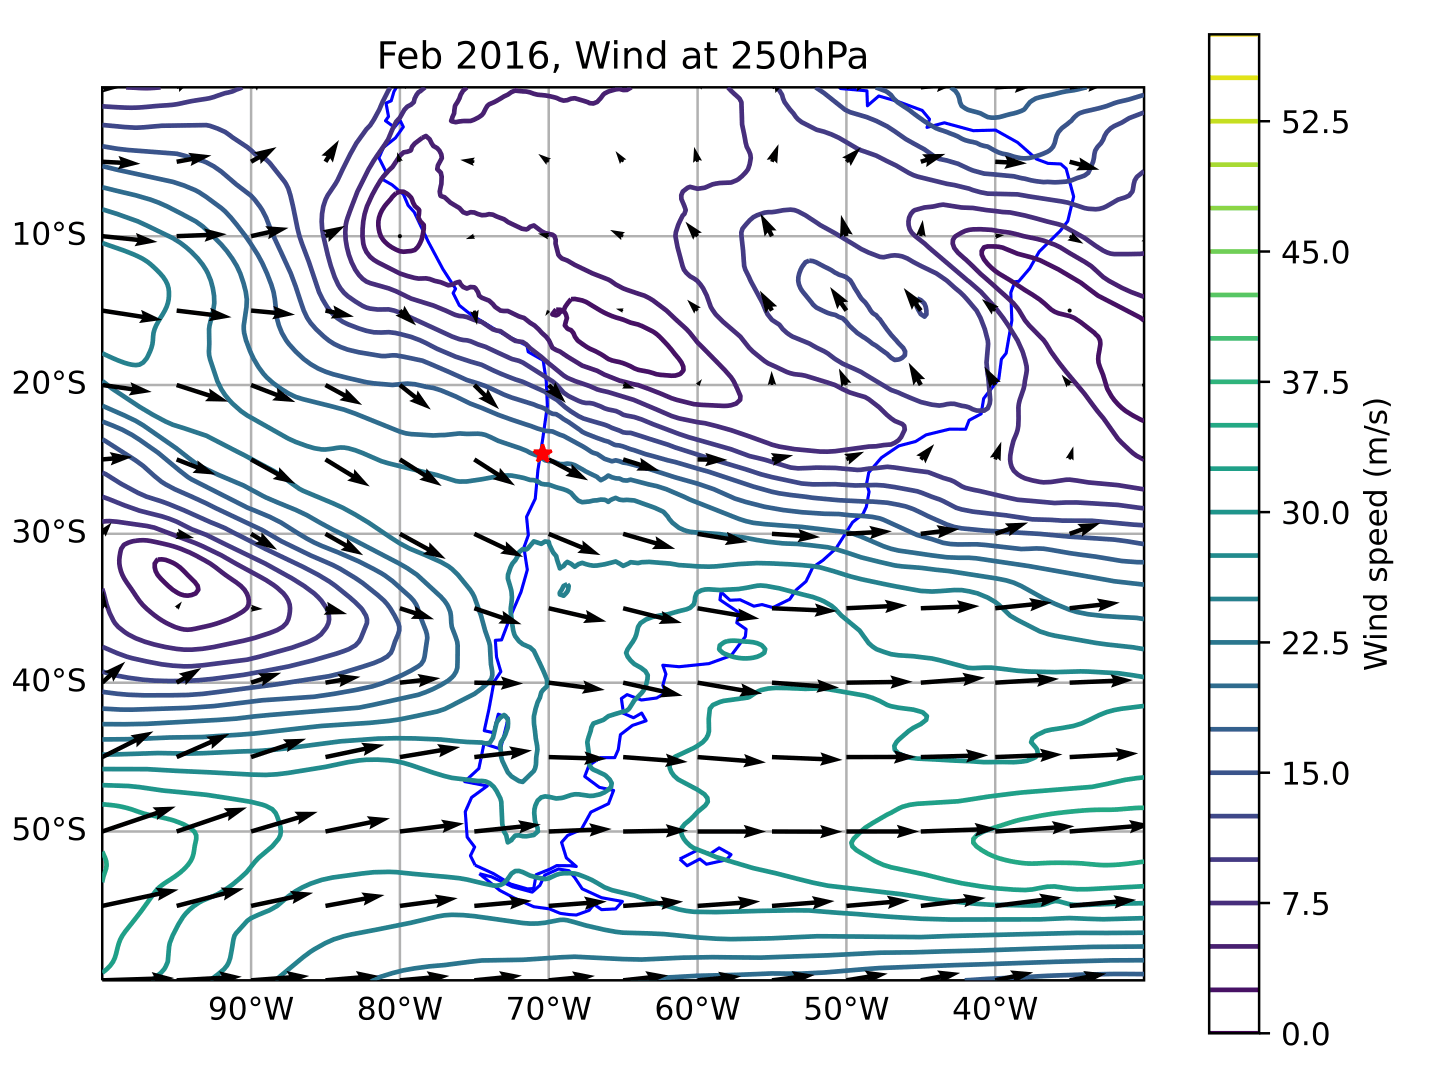 Gif showing the wind speed vectors and contours above South America for each month since January 2016 to April 2021